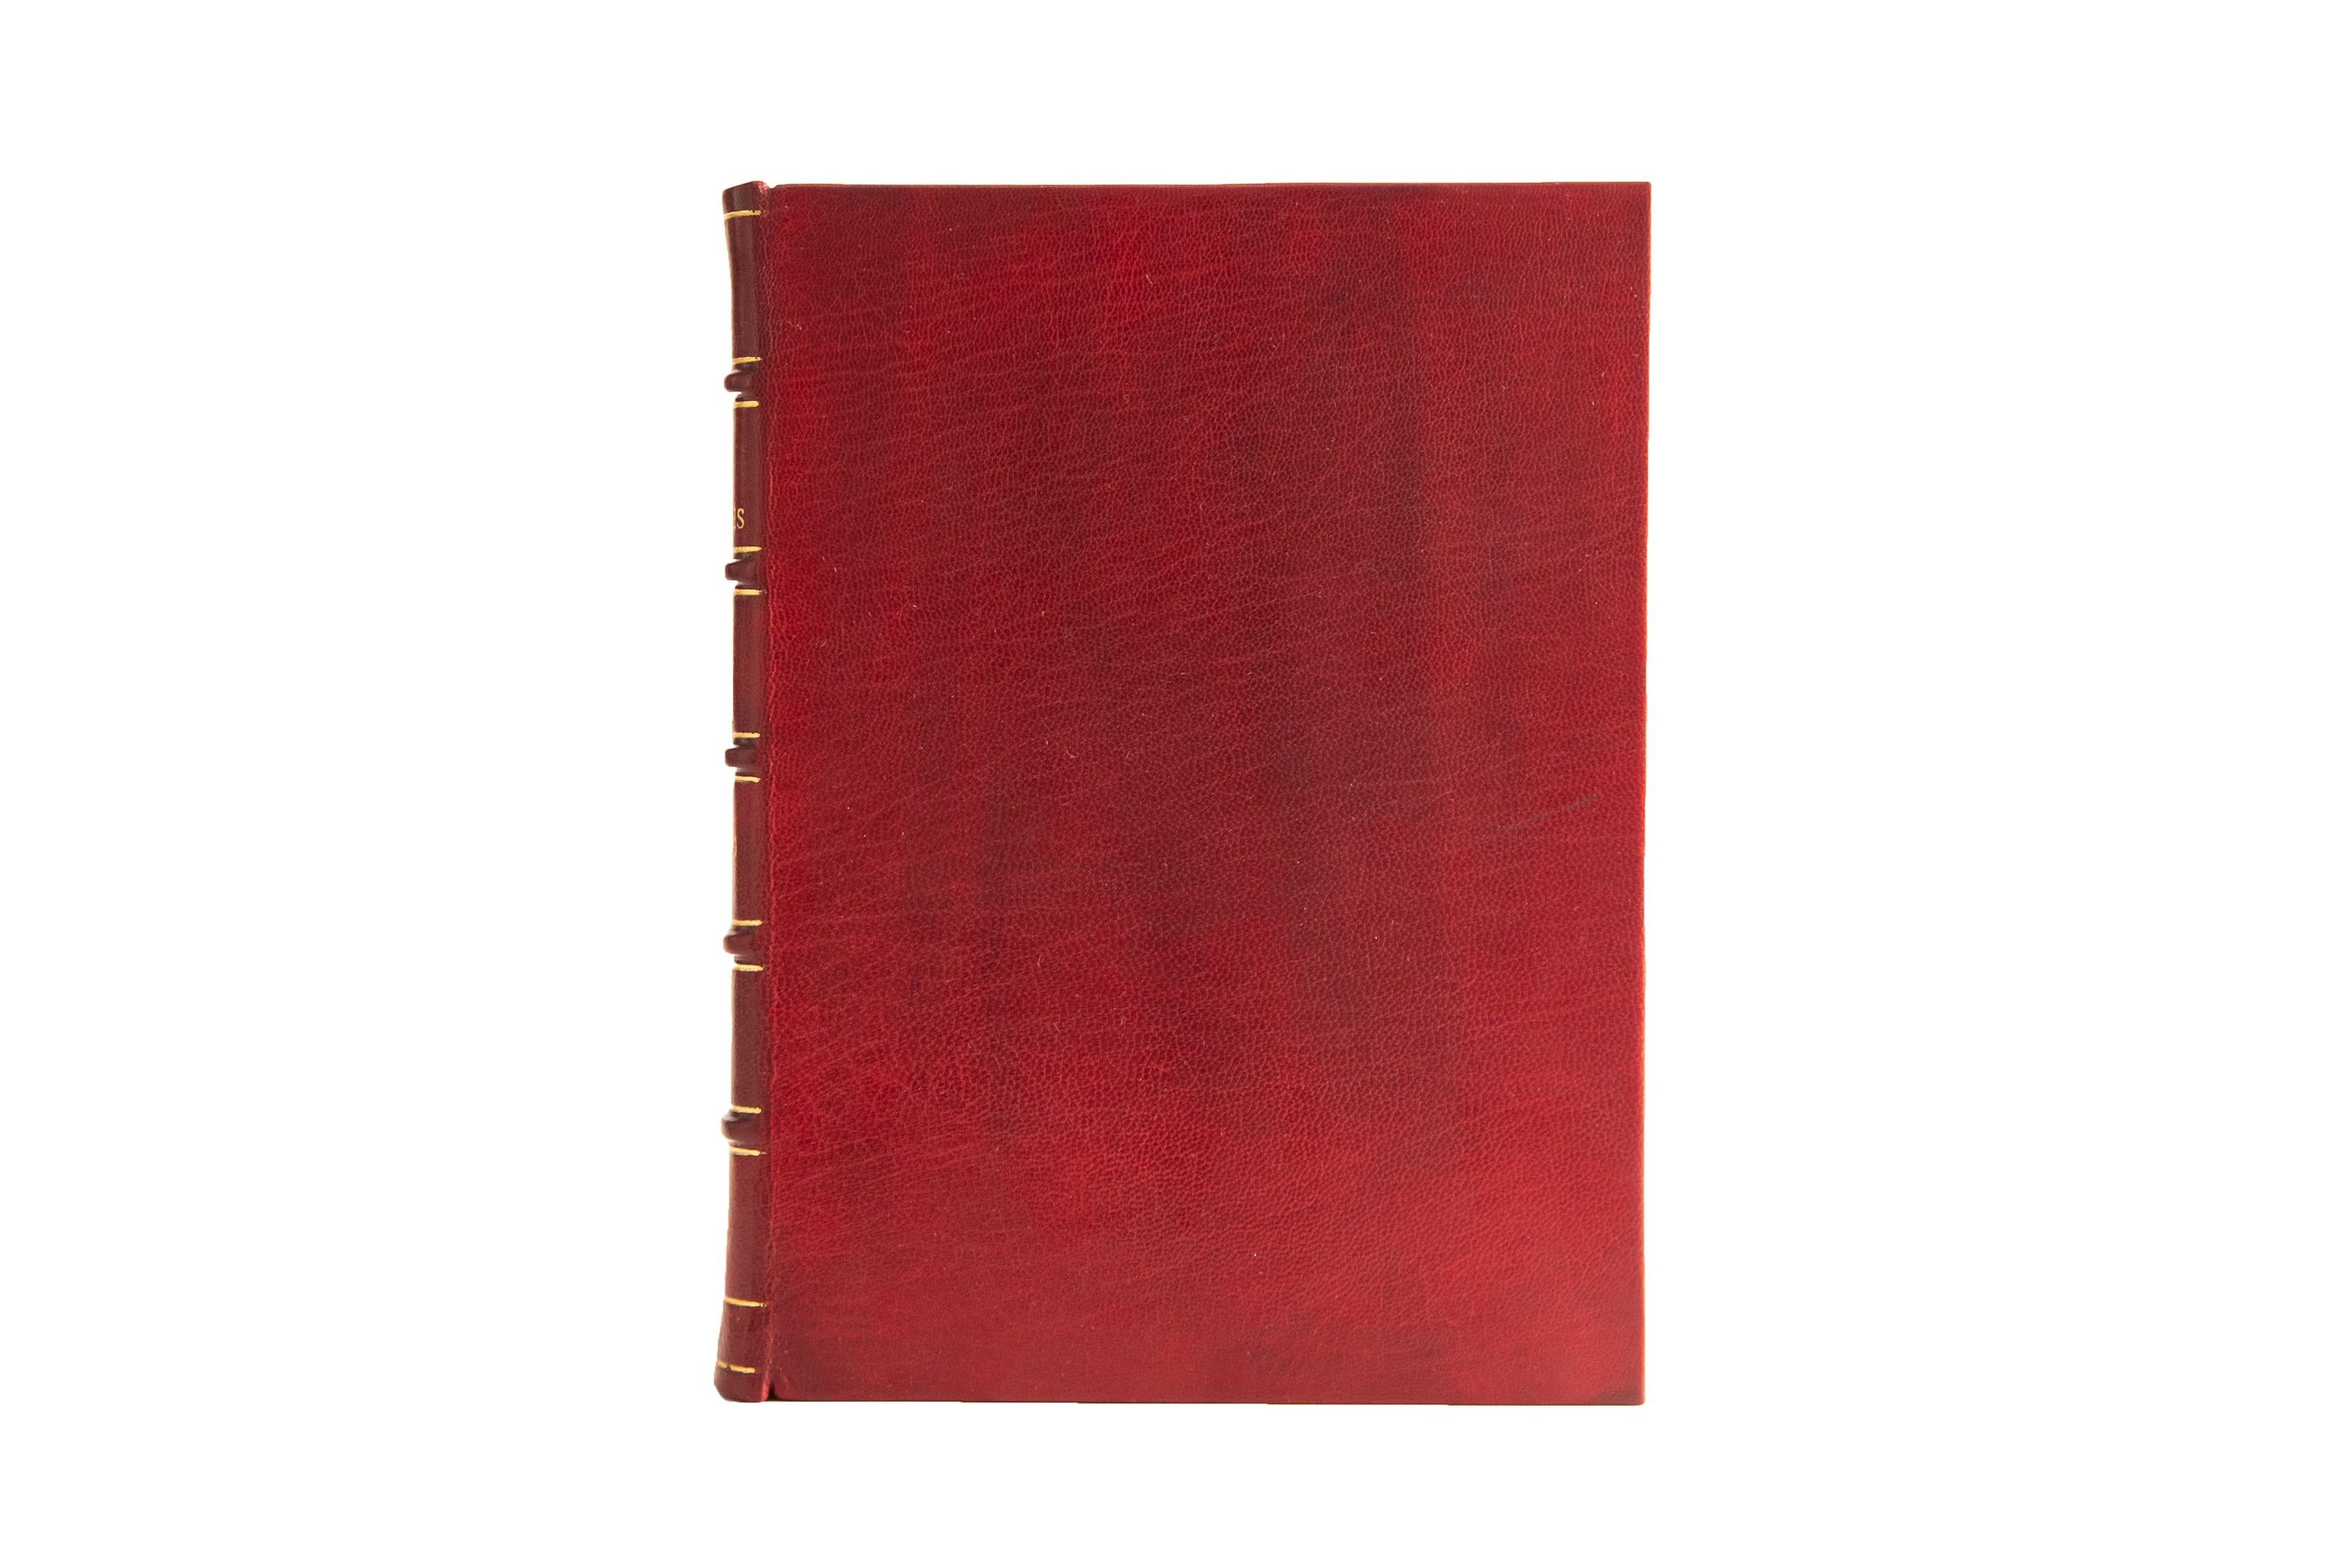 1 Volume, Rudyard Kipling, Just So Stories for Little Children. First Edition. Bound in full red morocco with raised bands and panels displaying bordering, floral detailing, and label lettering, all gilt-tooled. The top edge is gilt with marbled